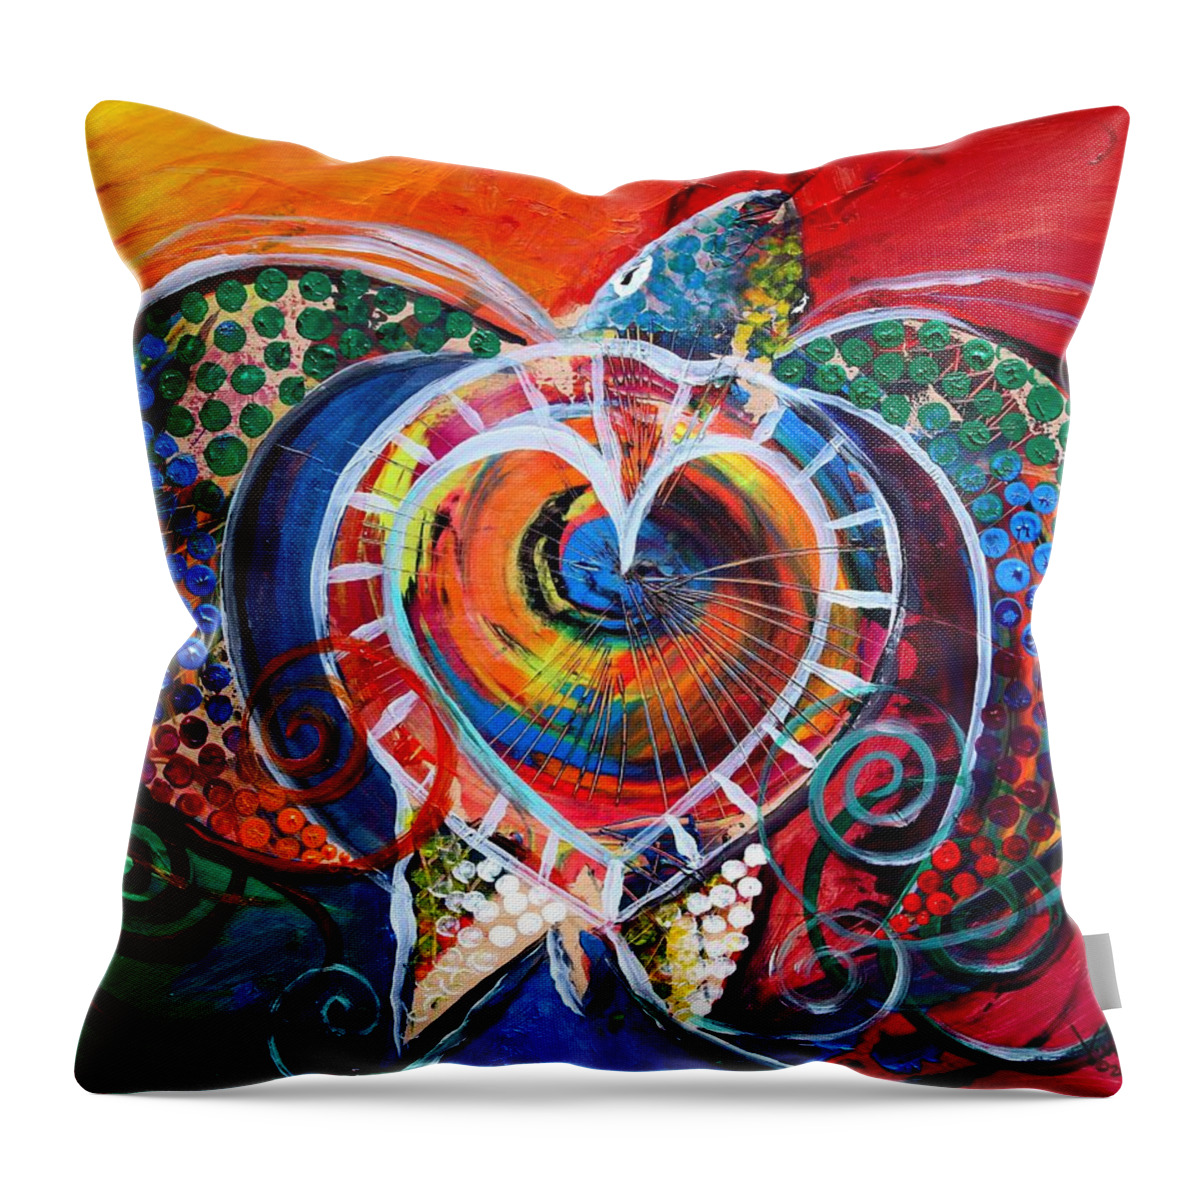 Sea Turtle Throw Pillow featuring the painting Sea Turtle Calm Complicated Love by J Vincent Scarpace